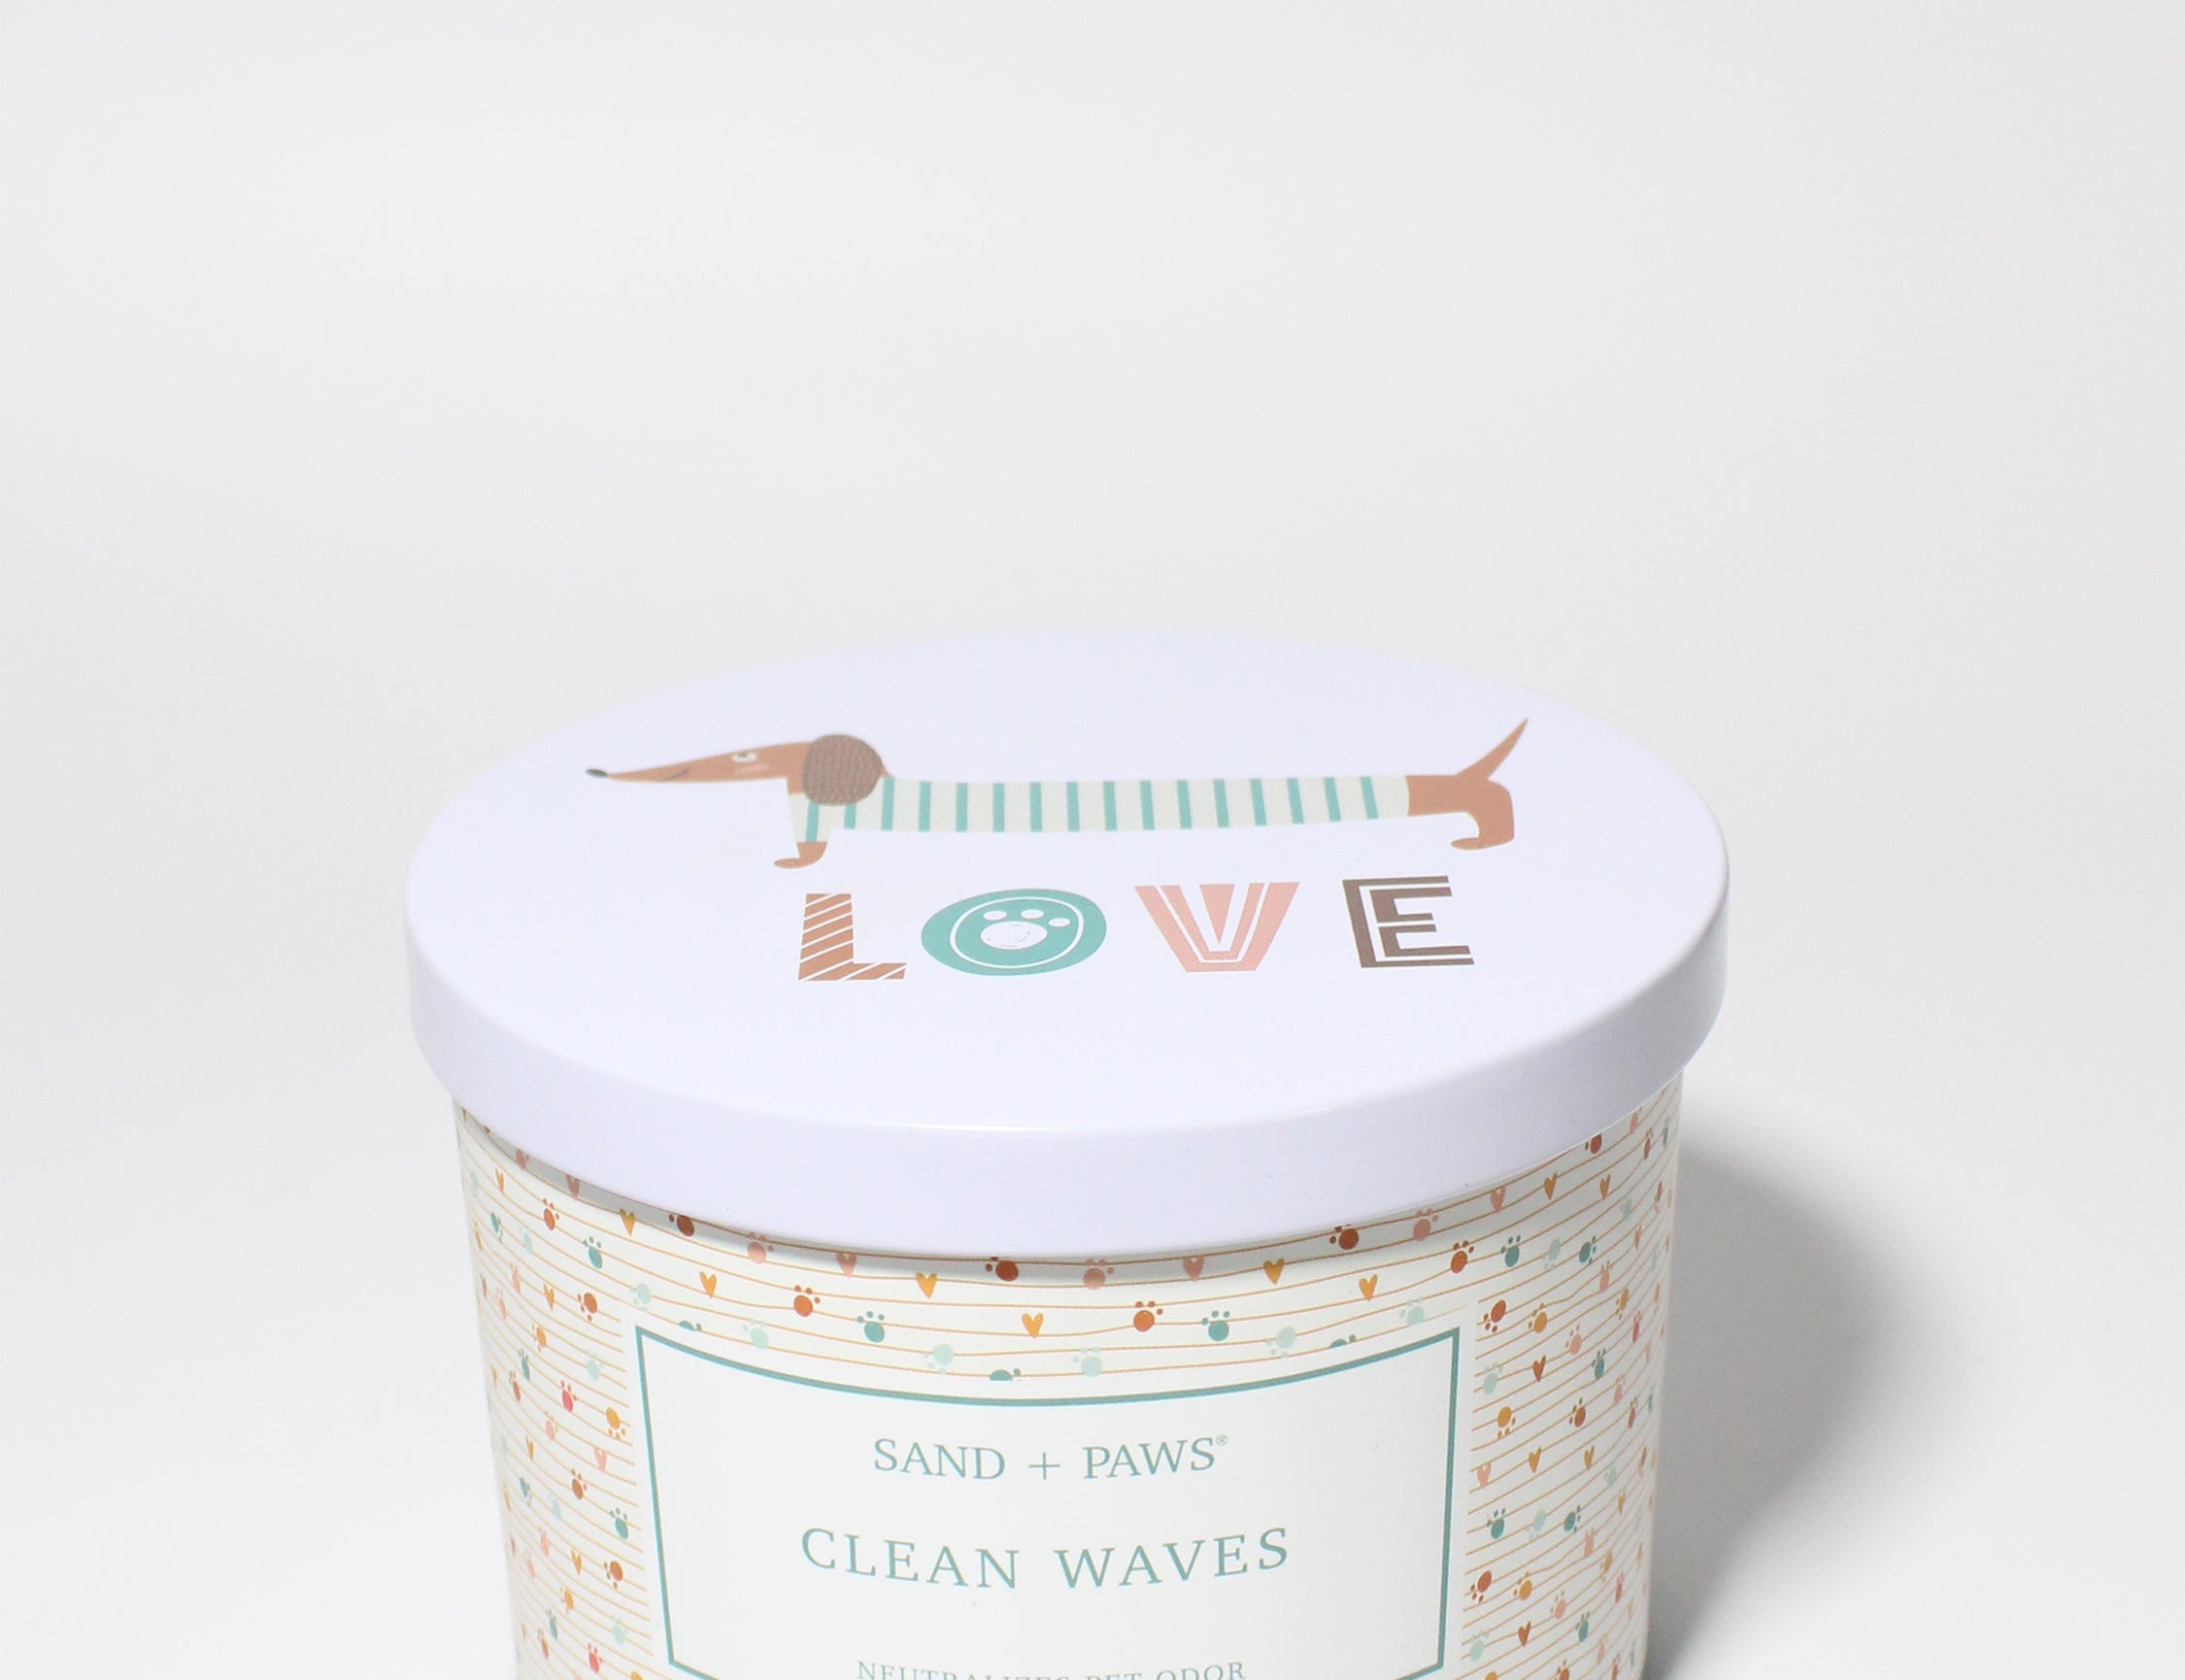 Sand + Paws Clean Waves 12 oz scented candle Wrap print vessel with LOVE Dachshund lid